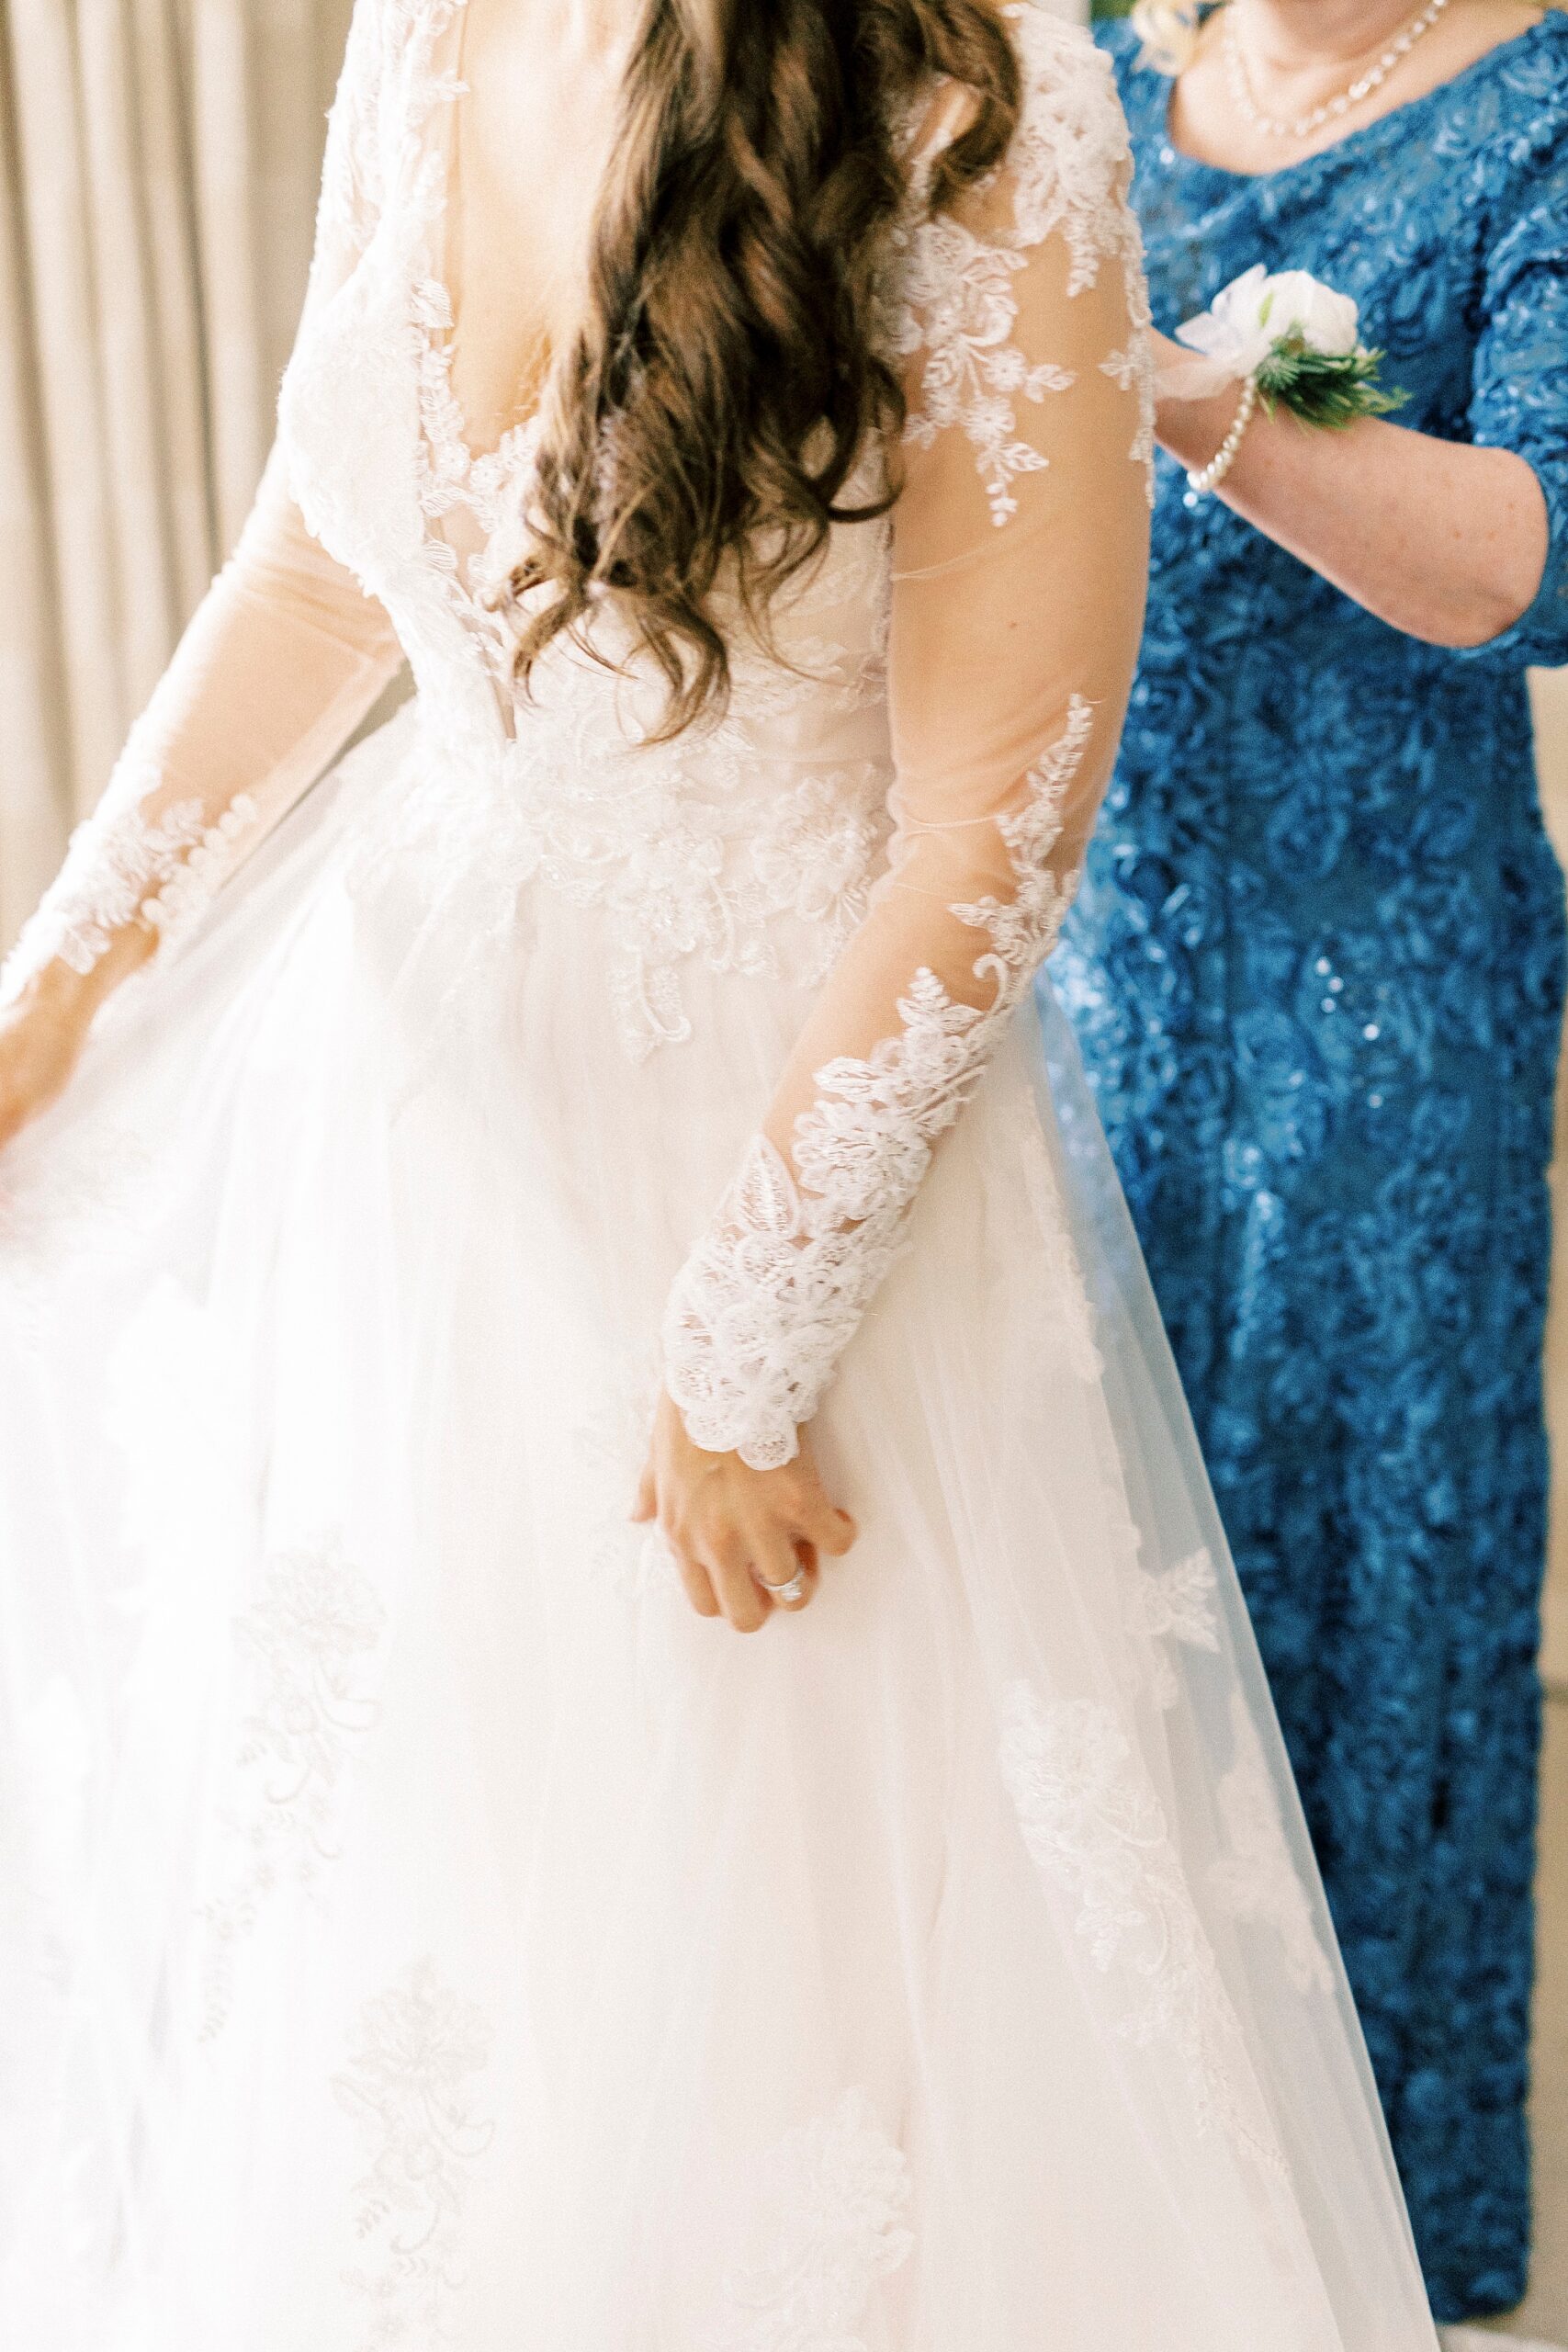 mother in blue dress helps bride with buttons on gown